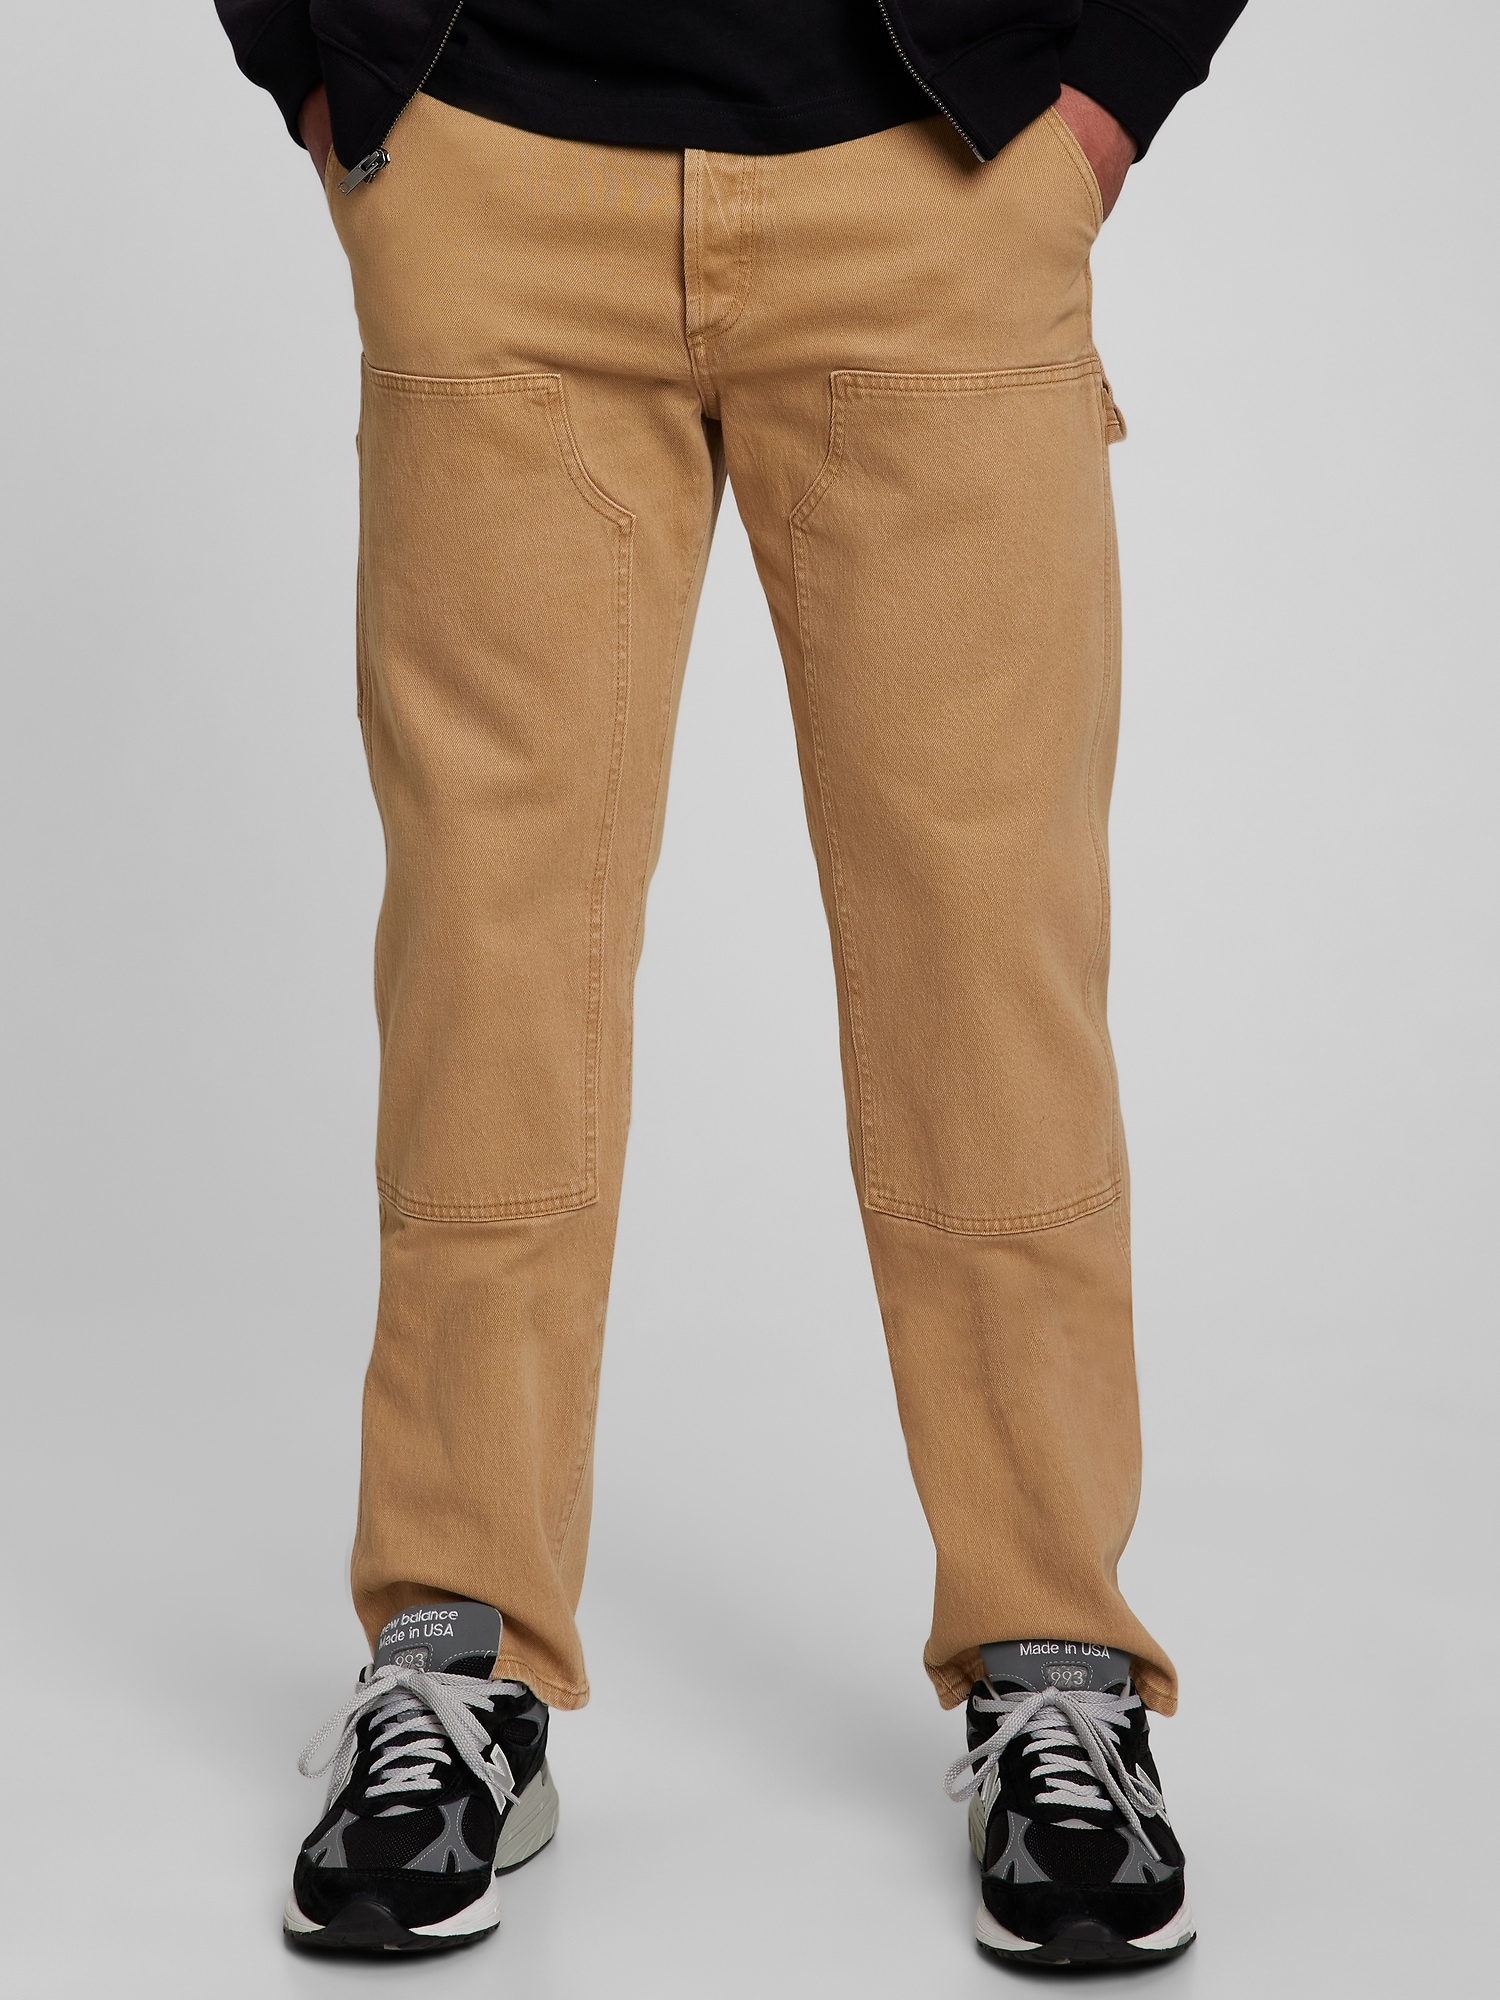 Buy Gap Carpenter Jeans from the Gap online shop